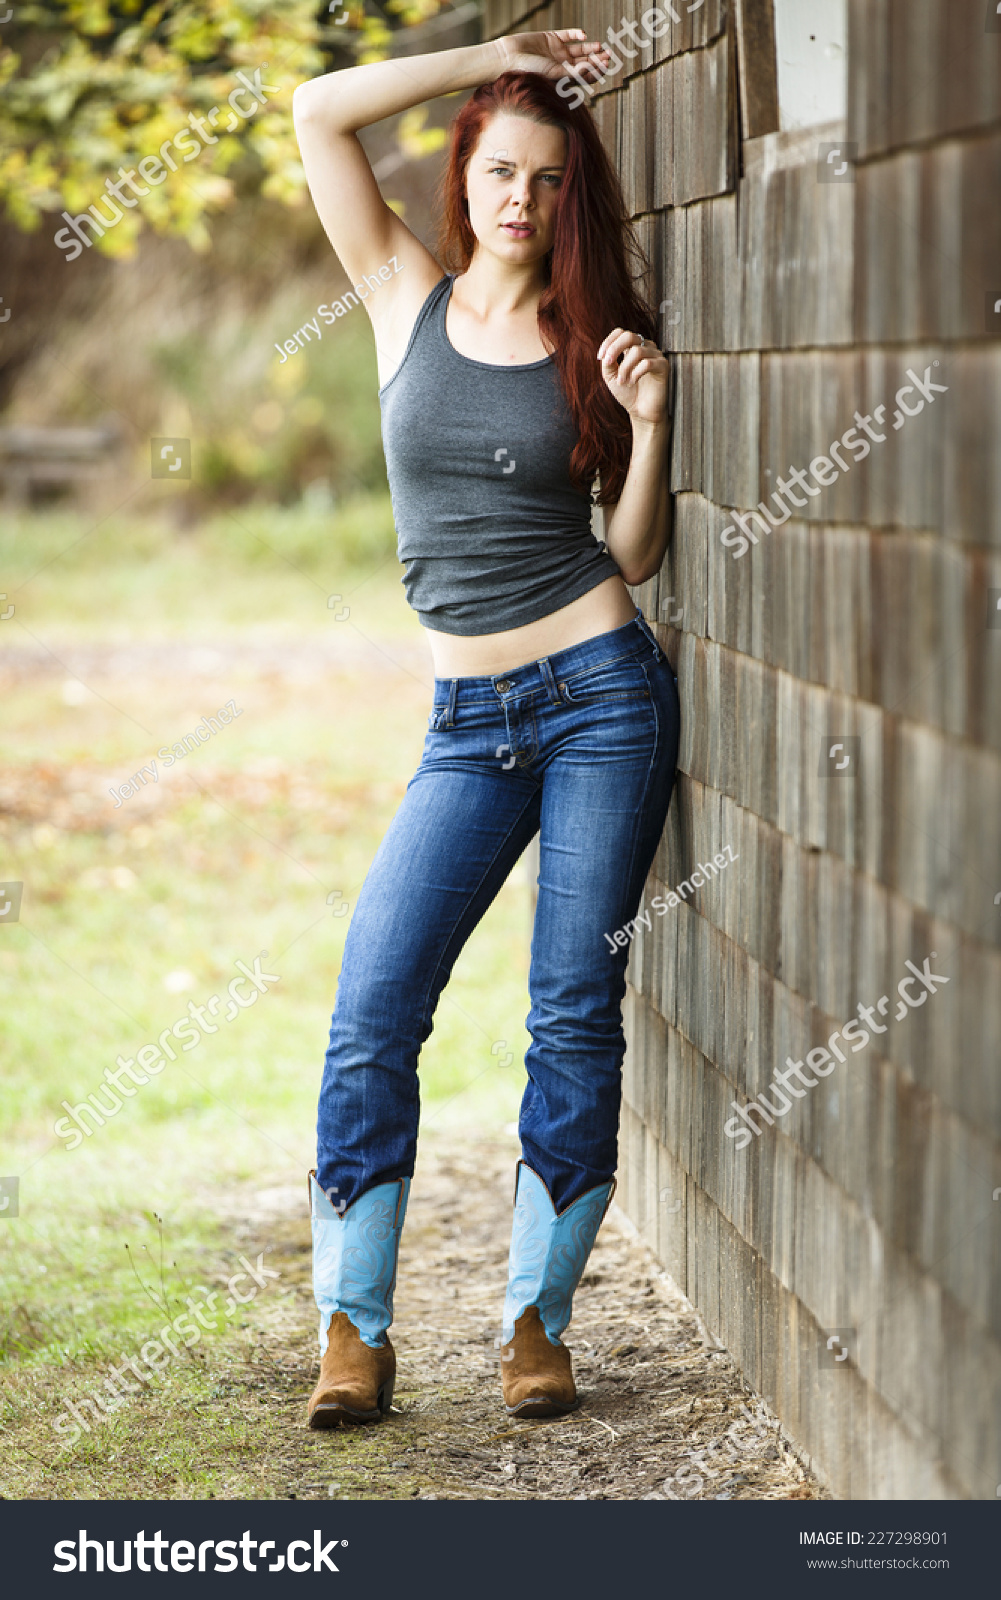 country girl jeans